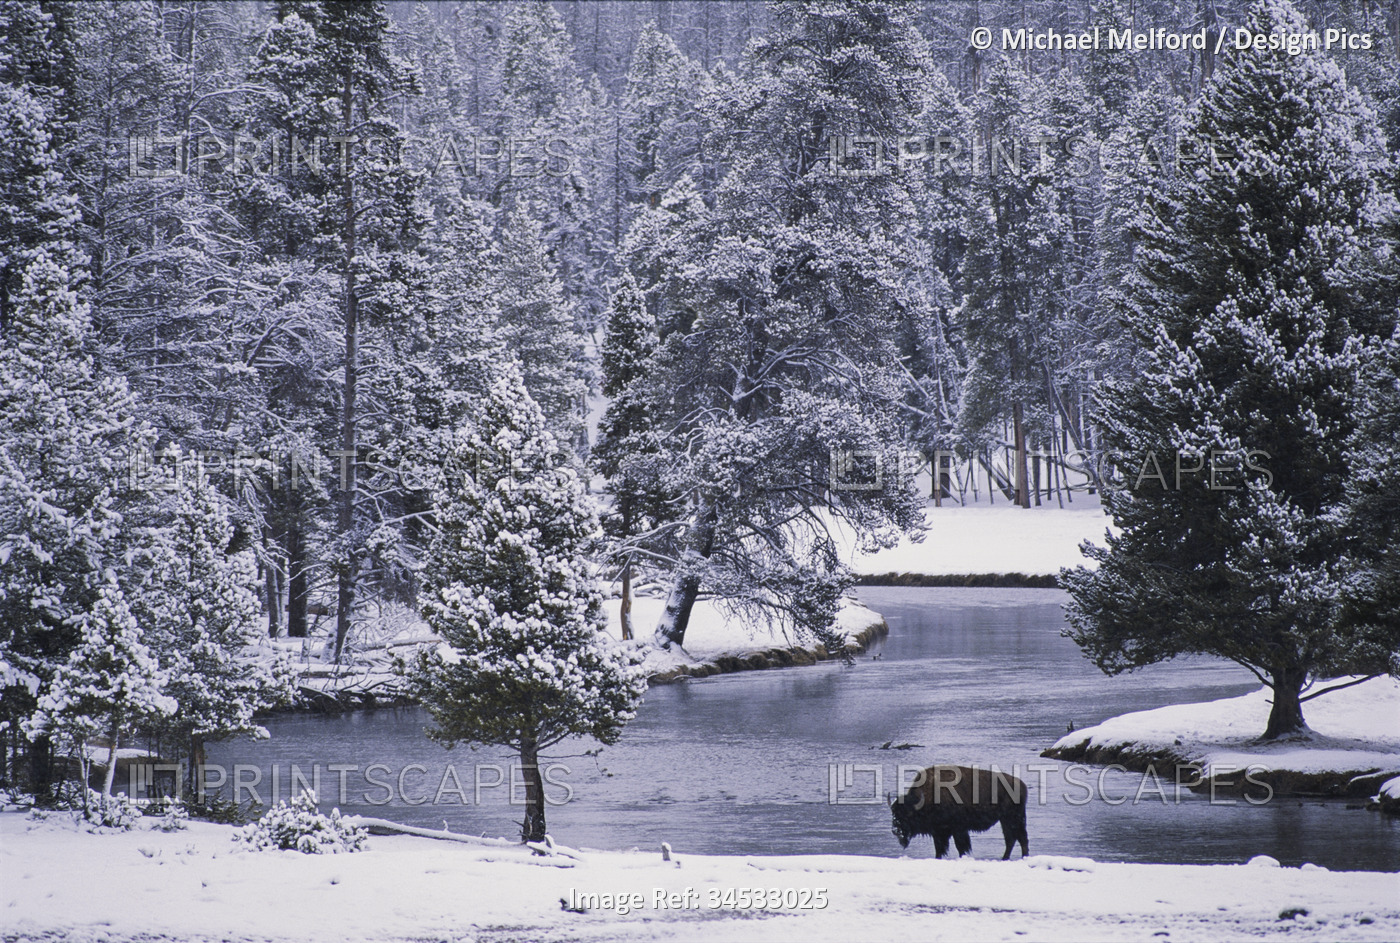 An American bison (Bison bison) alongside a river in a snowy forest in ...